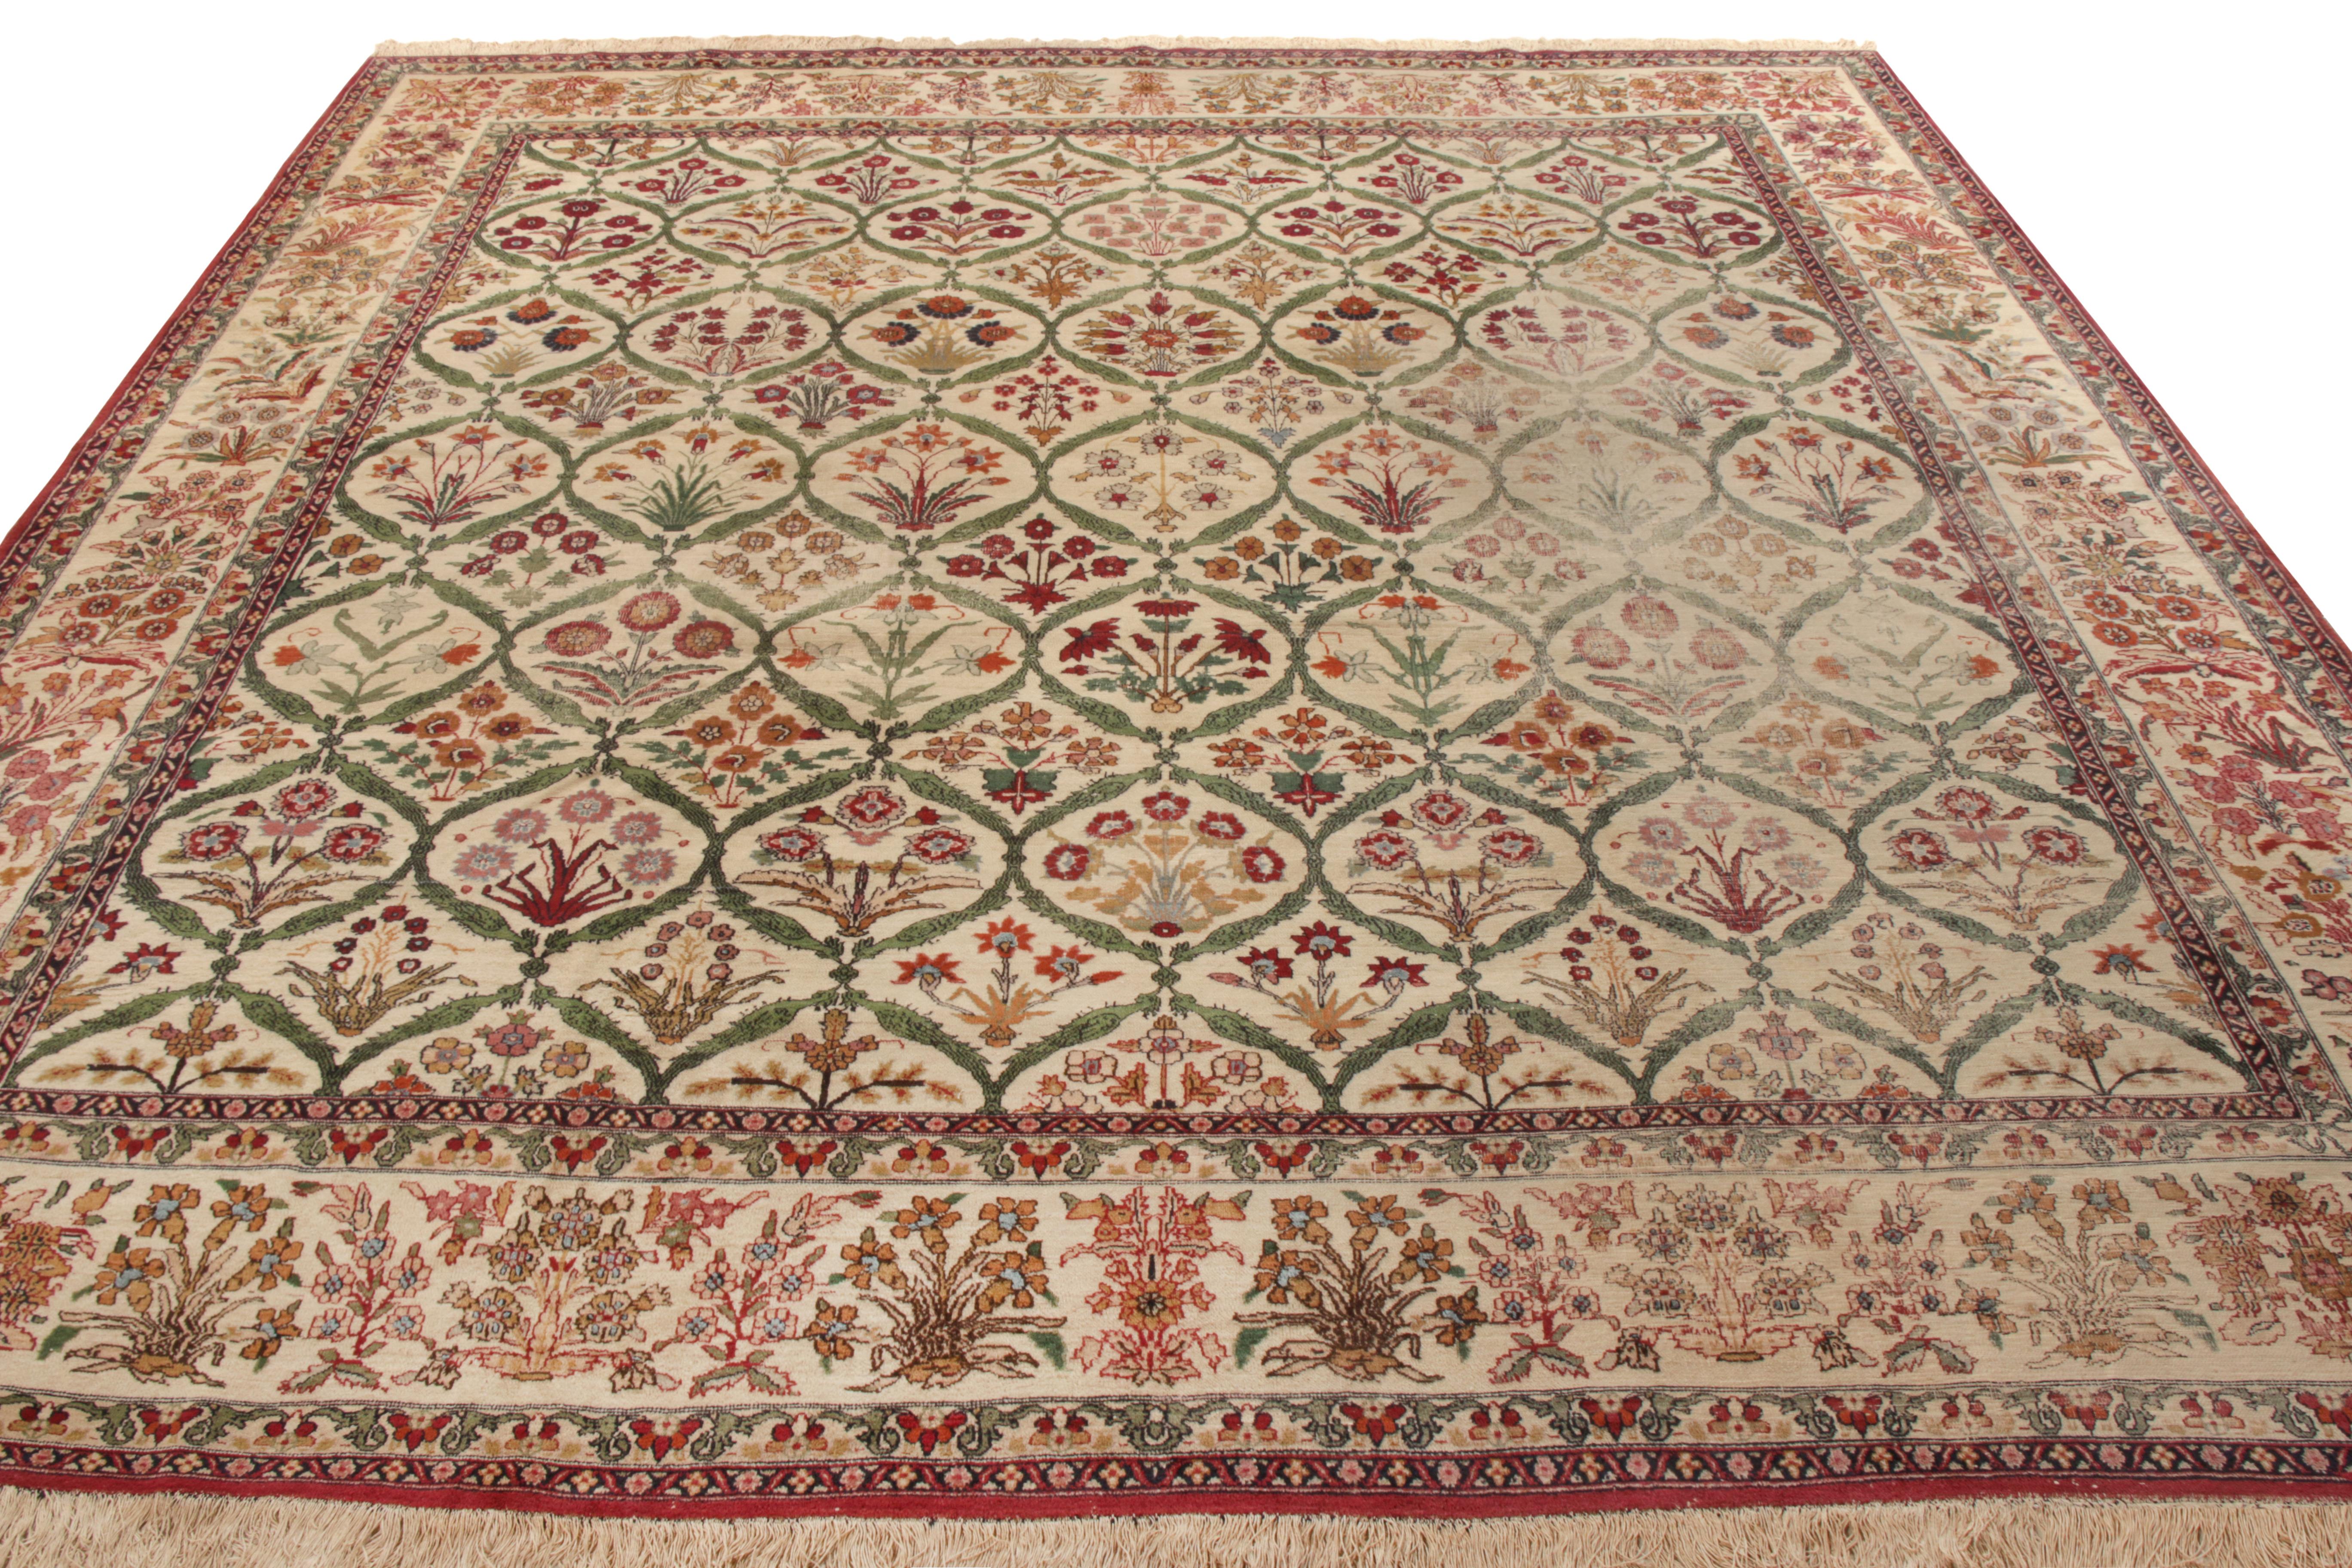 Hand knotted in wool from India circa 1890-1900, this antique 9x15 Indian rug of antique Mogul lineage joins the rare square-sized rugs in our Antique & Vintage Collection. The pattern flourishes in an enticing floral pattern covering the scale in a